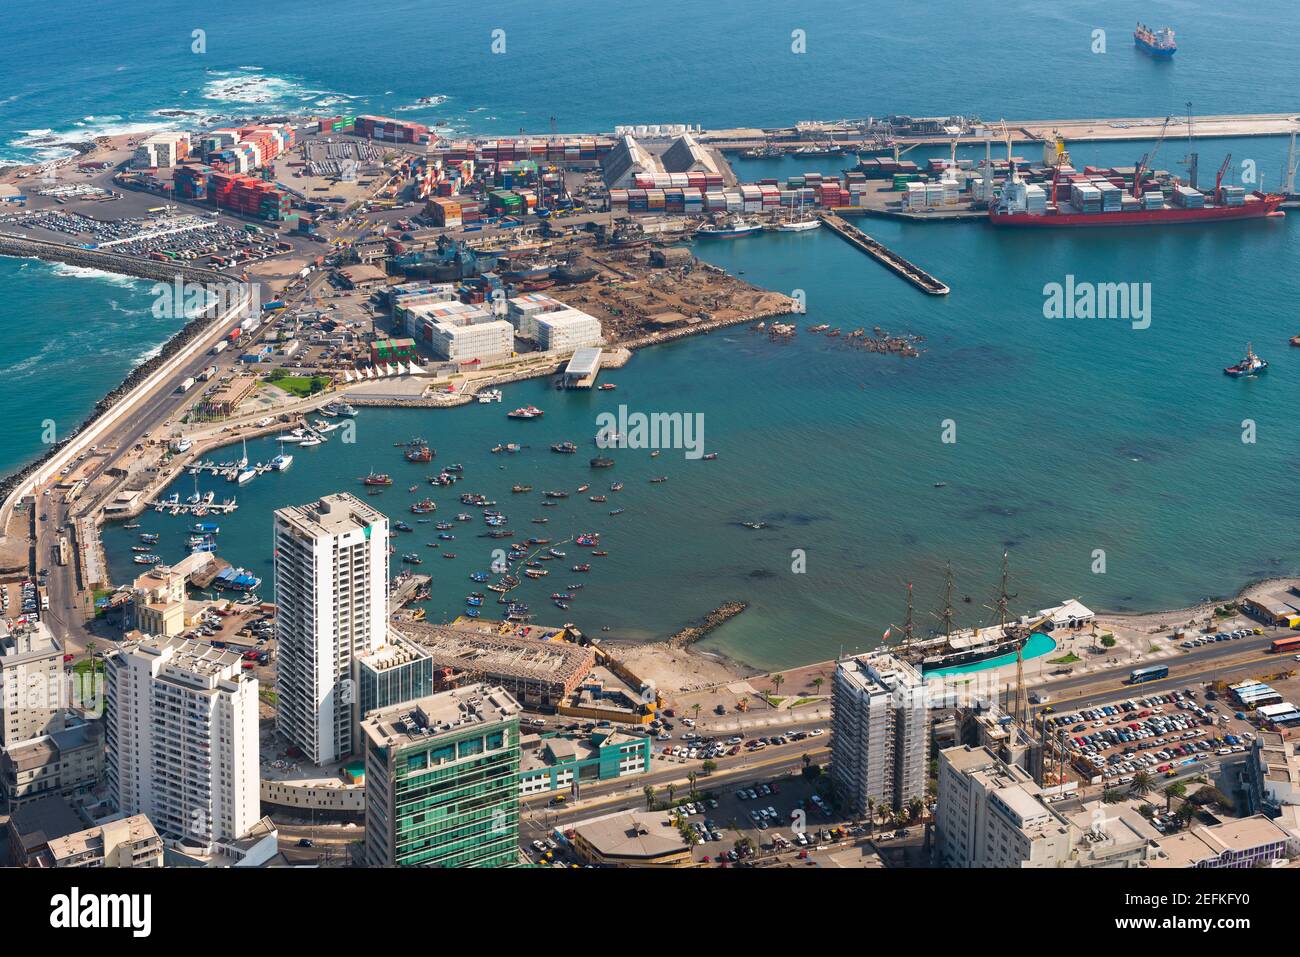 Iquique, Tarapaca Region; Chile - Aerial view of the port city of Iquique in northern Chile at the shores of the Atacama Desert. Stock Photo